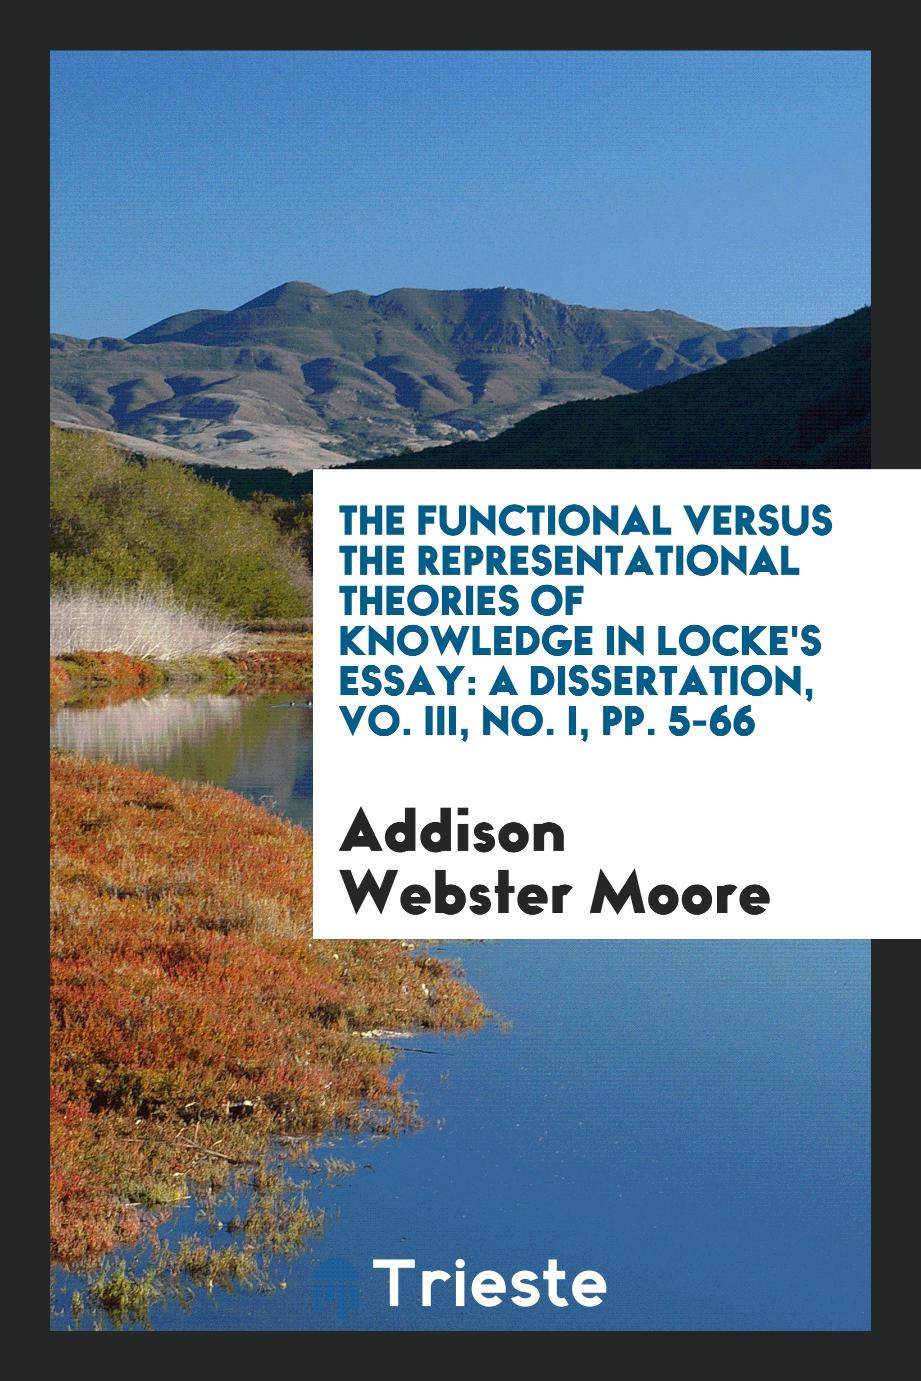 The Functional Versus the Representational Theories of Knowledge in Locke's Essay: a dissertation, Vo. III, No. I, pp. 5-66